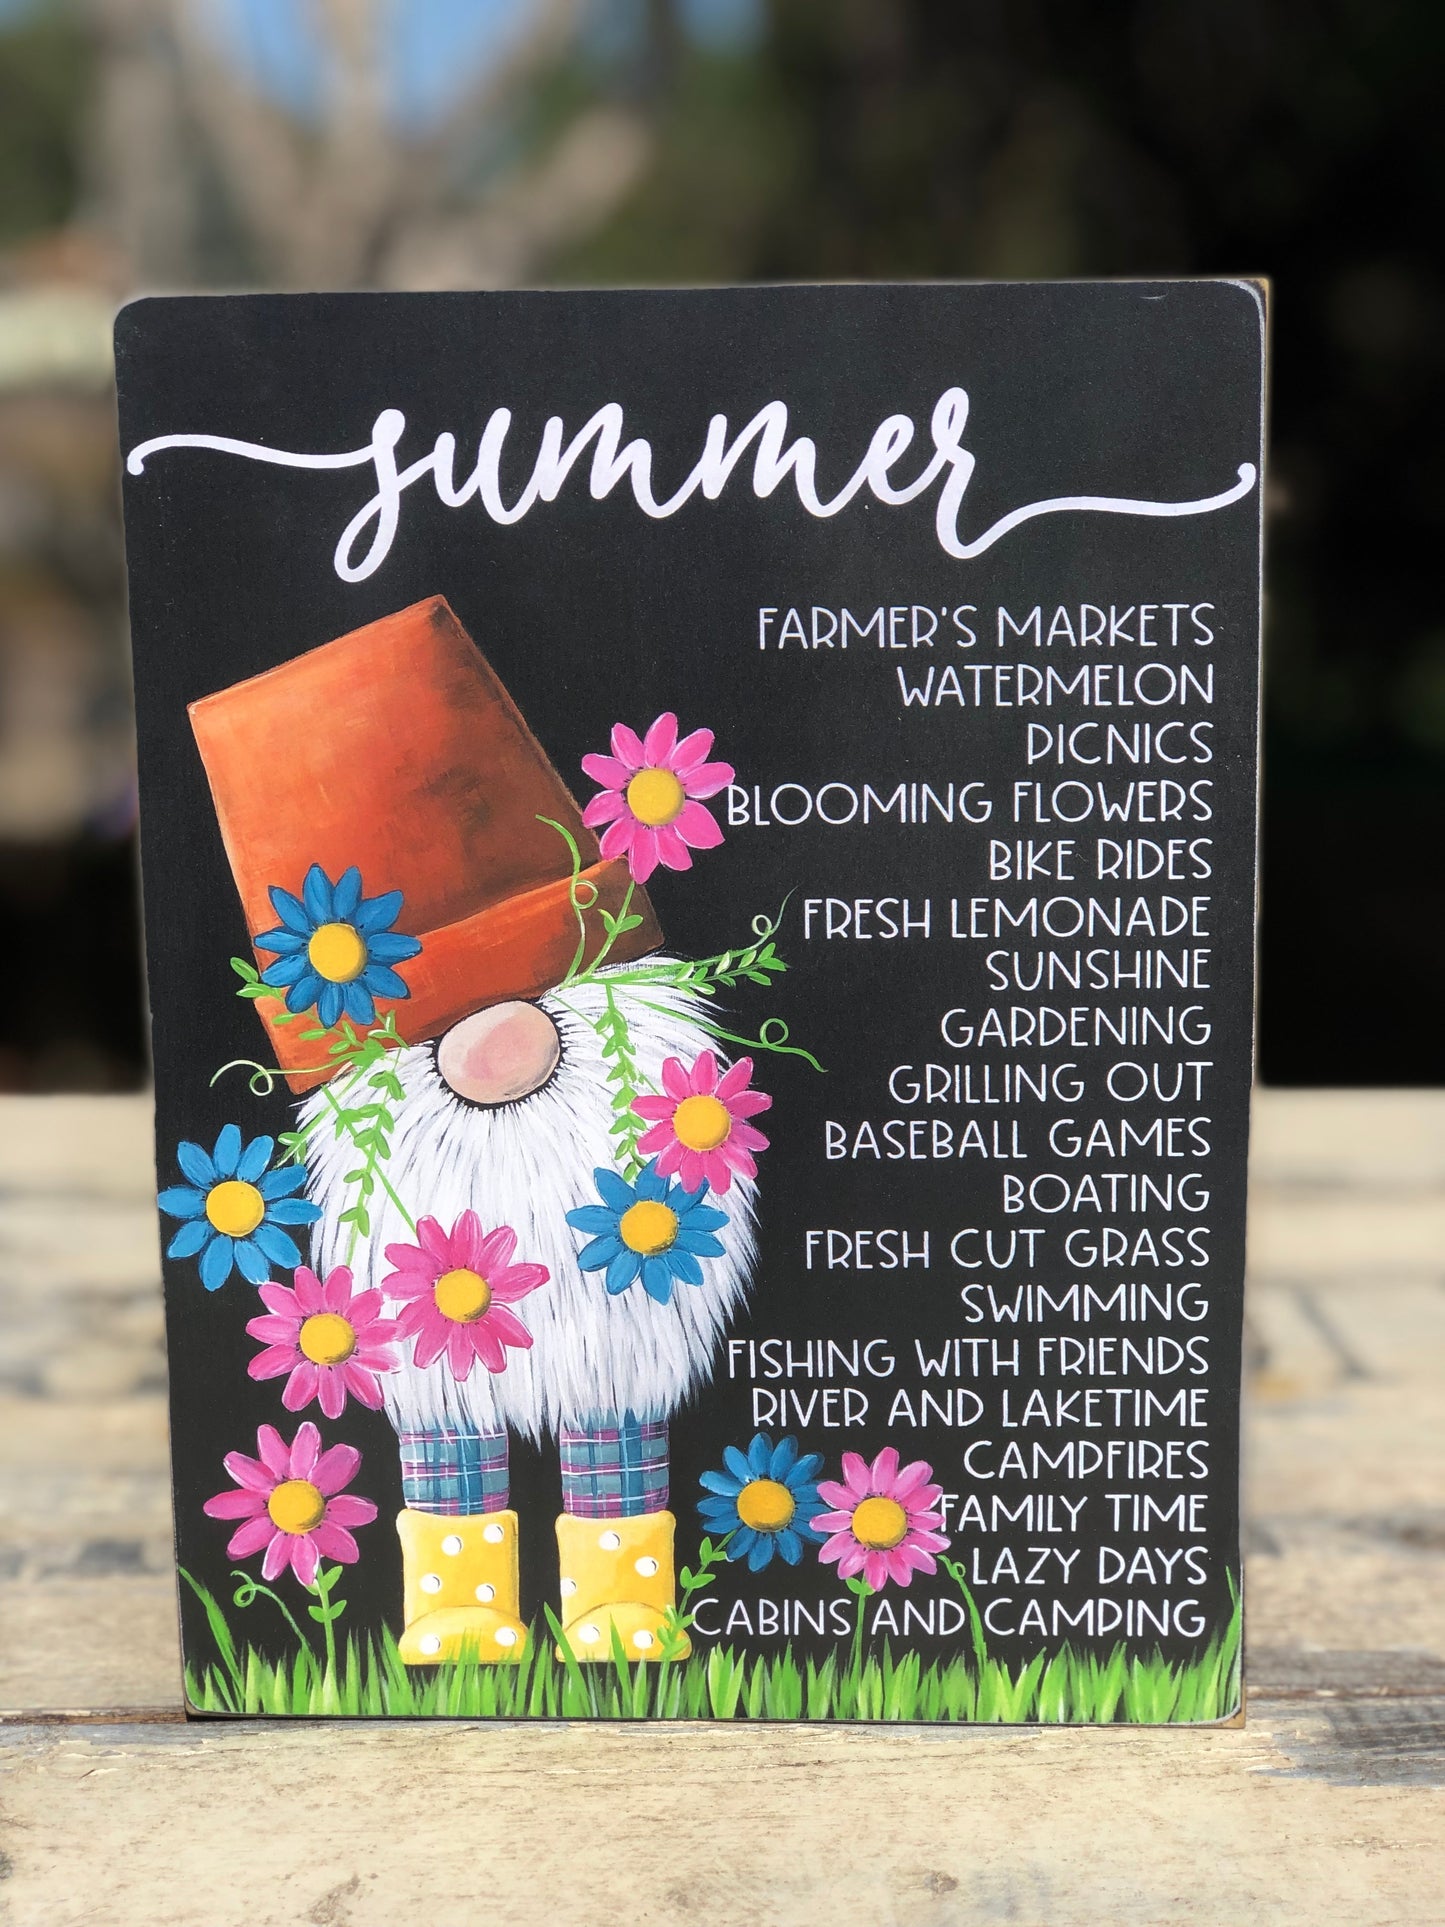 SOMEDAY EVERYTHING WILL MAKE PERFECT SENSE/SUMMER BUCKET LIST WITH GNOME WITH FLOWER POT HAT- WOOD SIGN